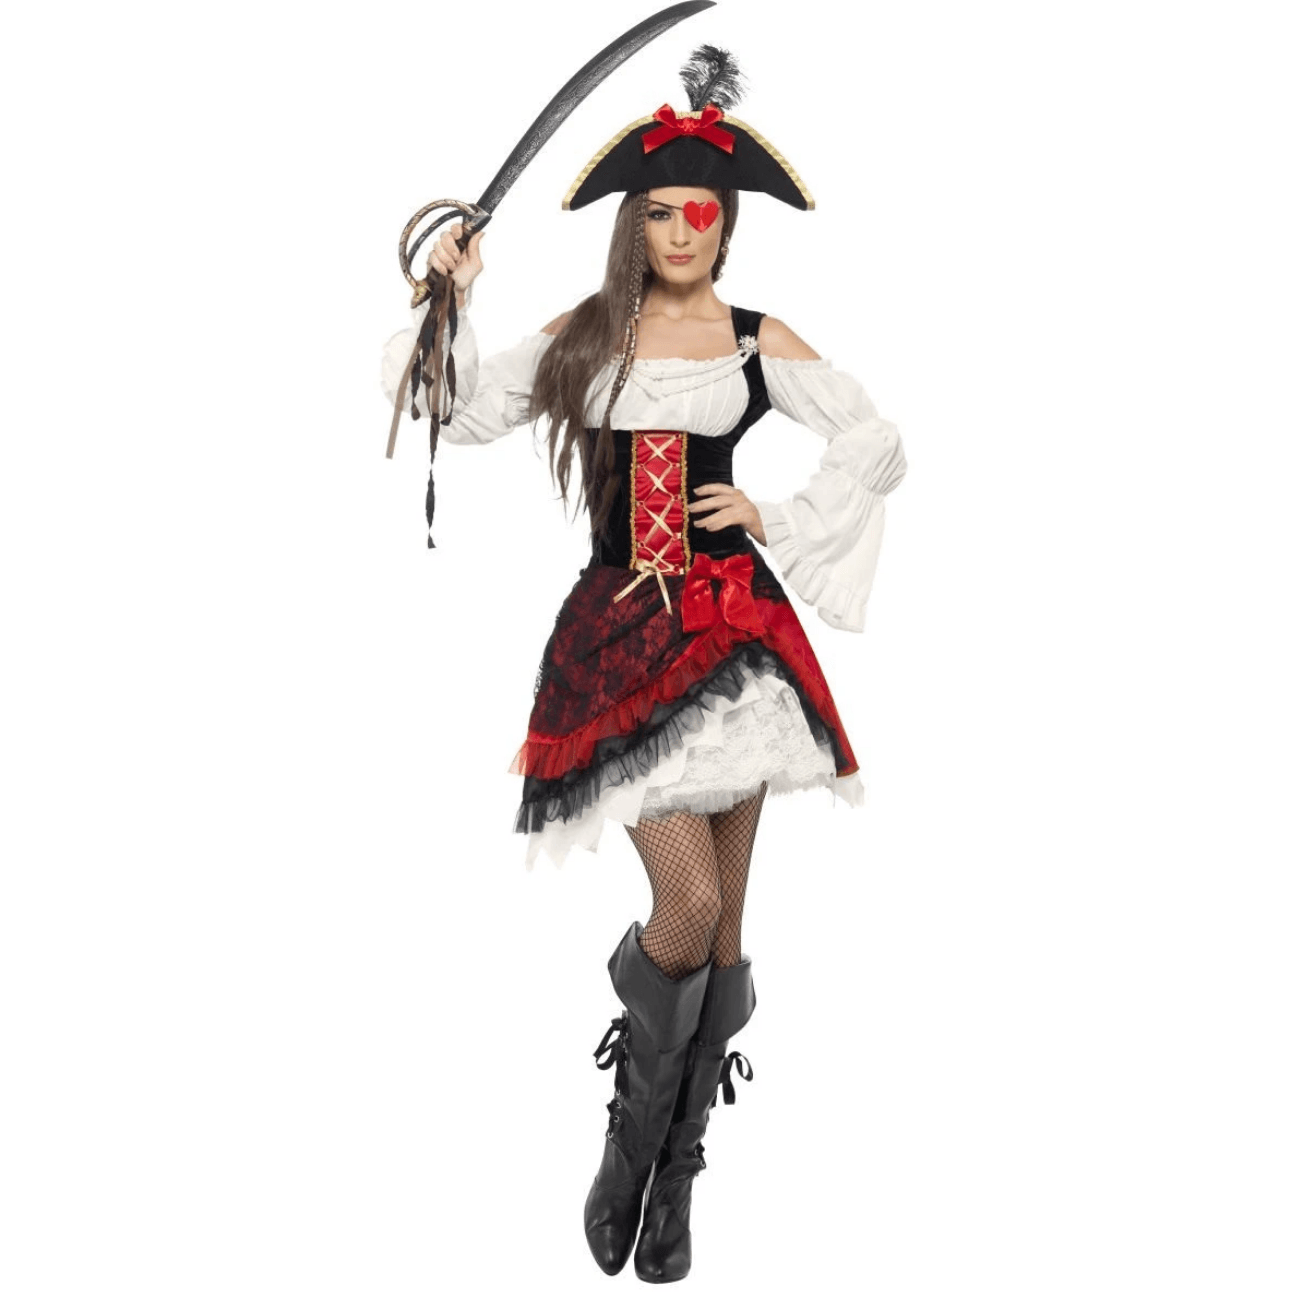 Deluxe Glamorous Lady Pirate Adult Costume